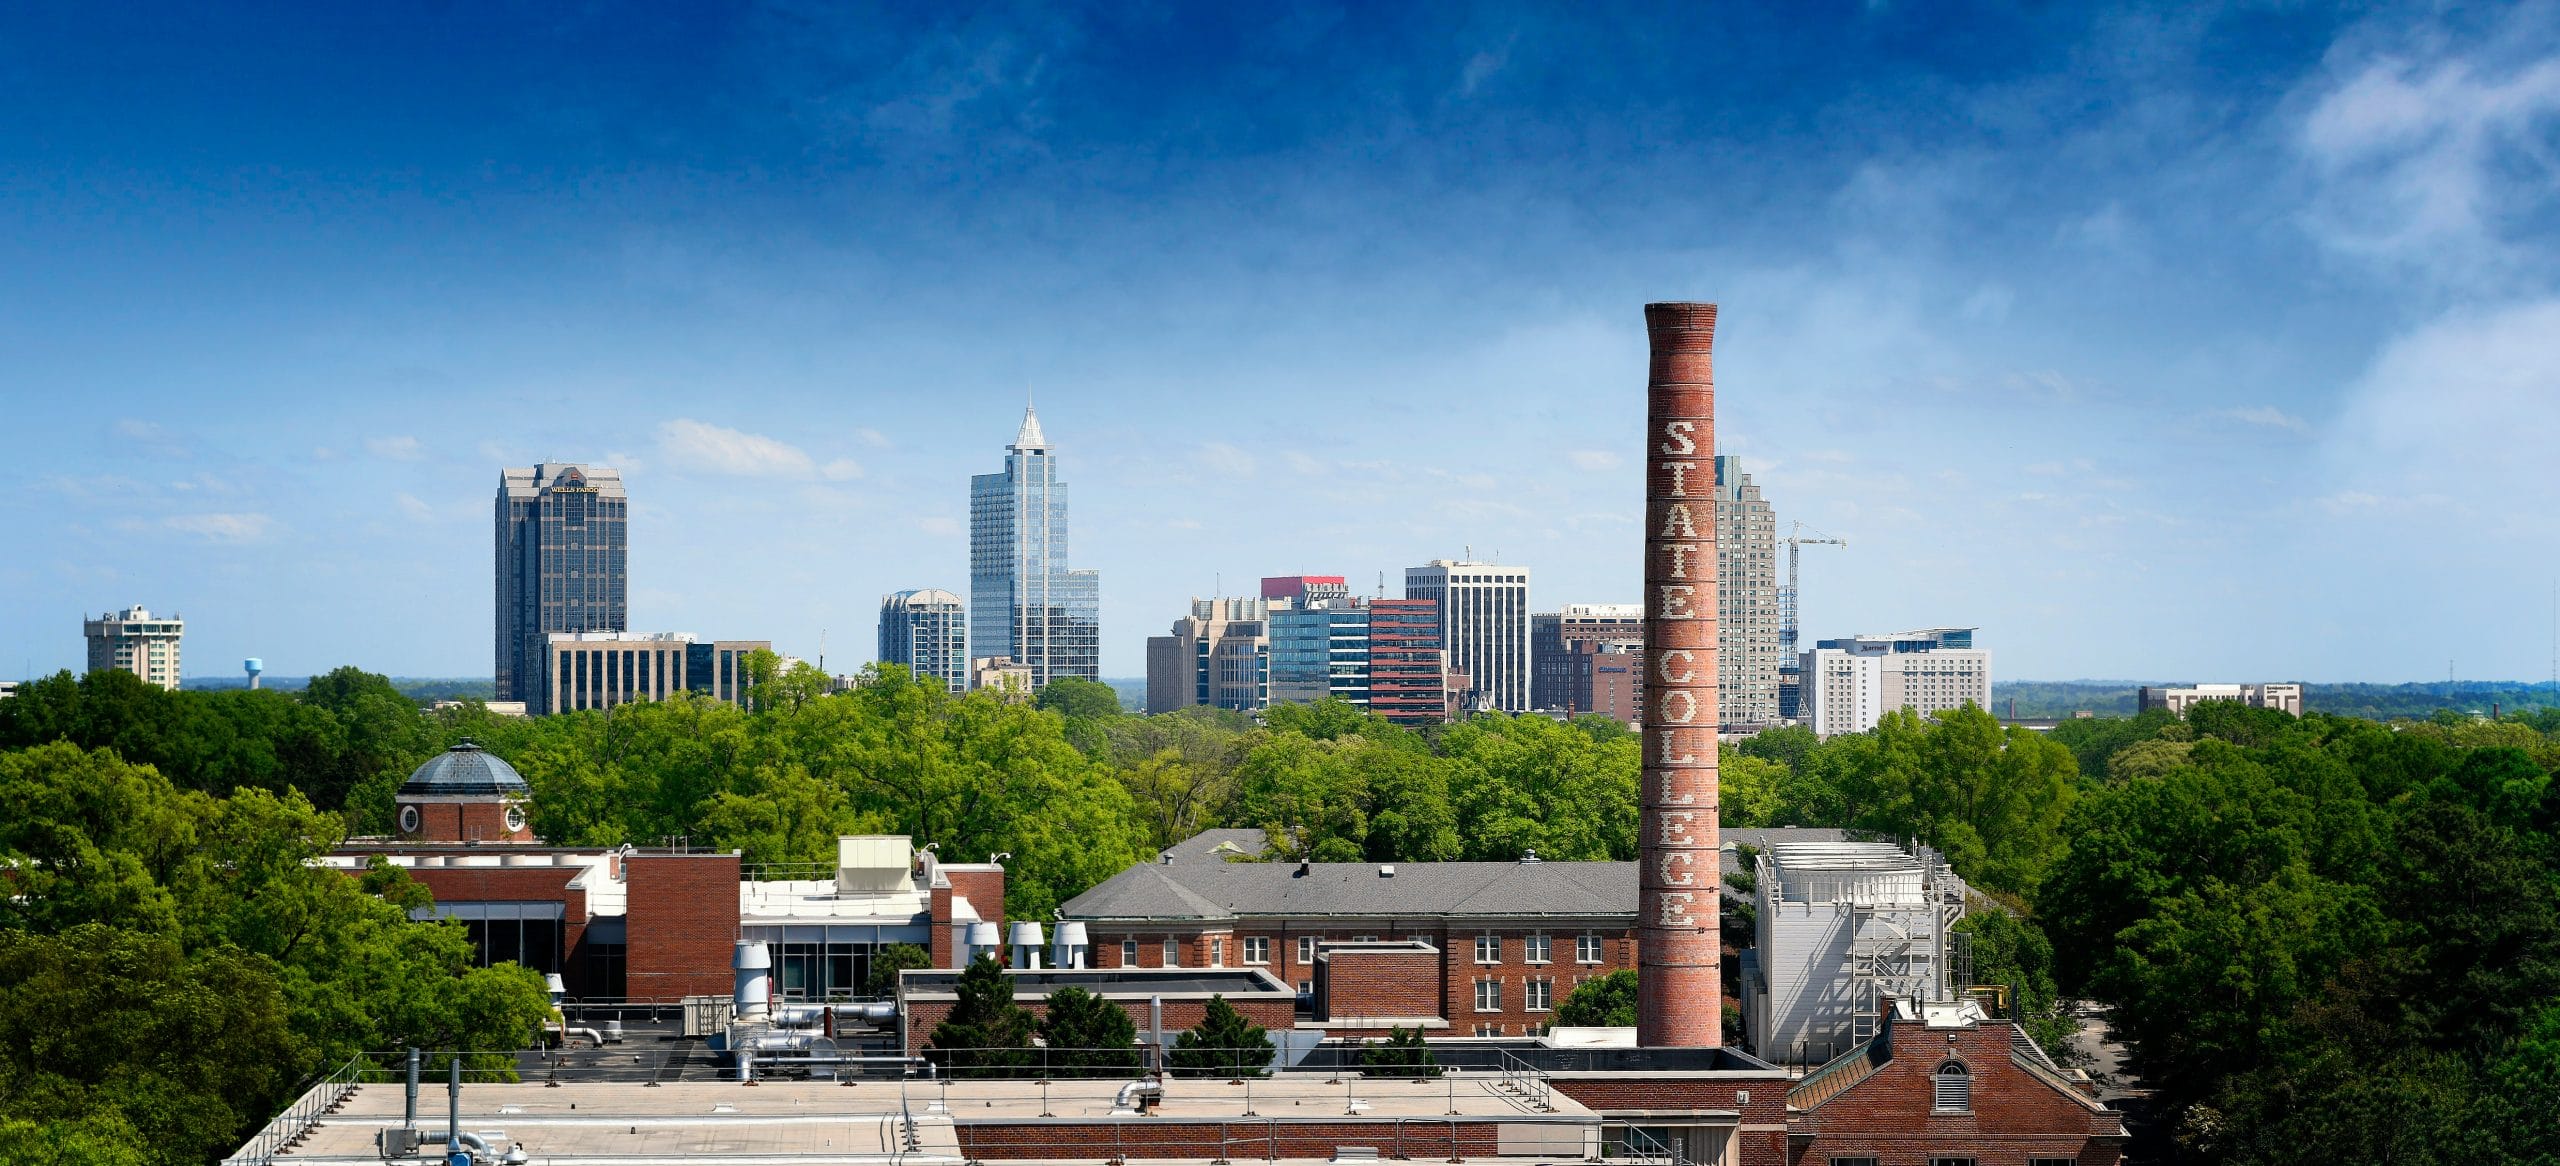 Downtown Raleigh skyline, framed by the State College smoke stack.